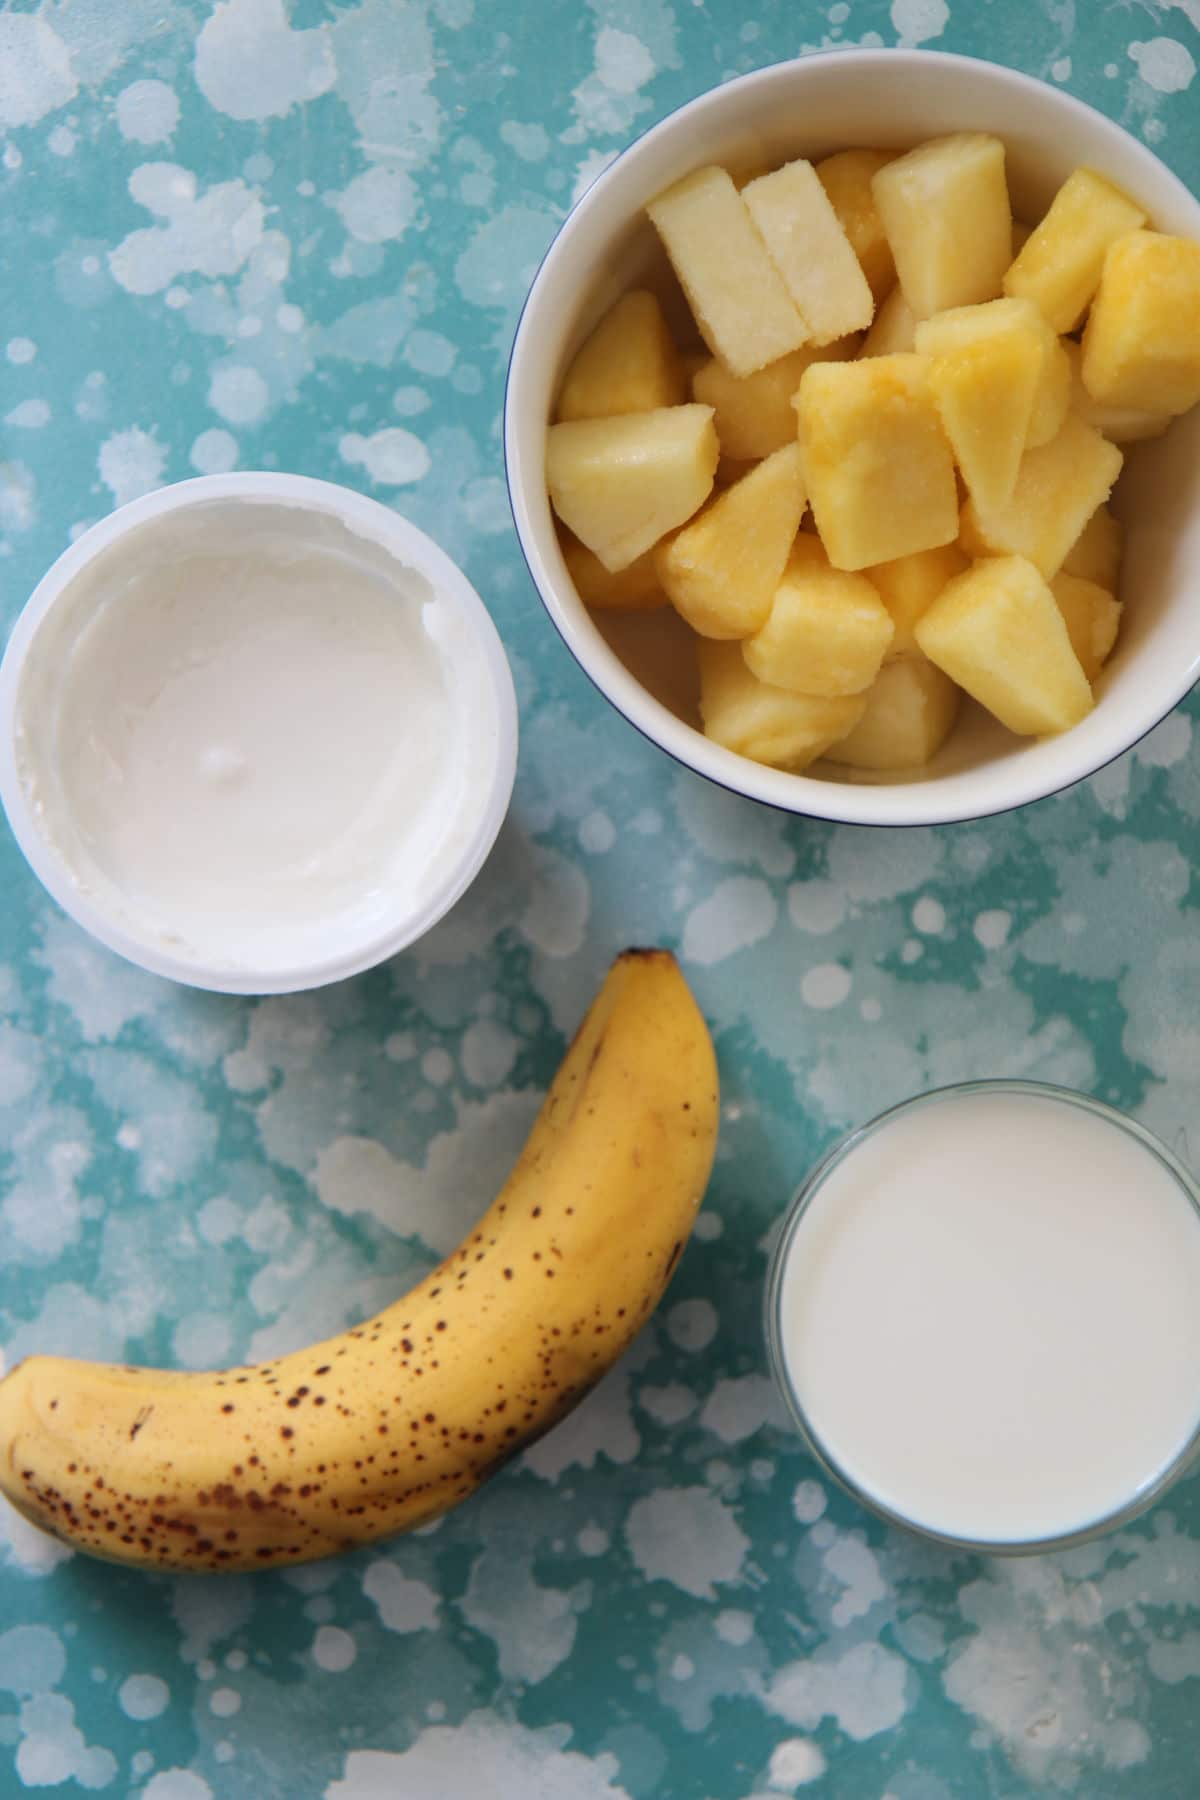 frozen pineapples, milk, yogurt, and banana on a blue and white board.